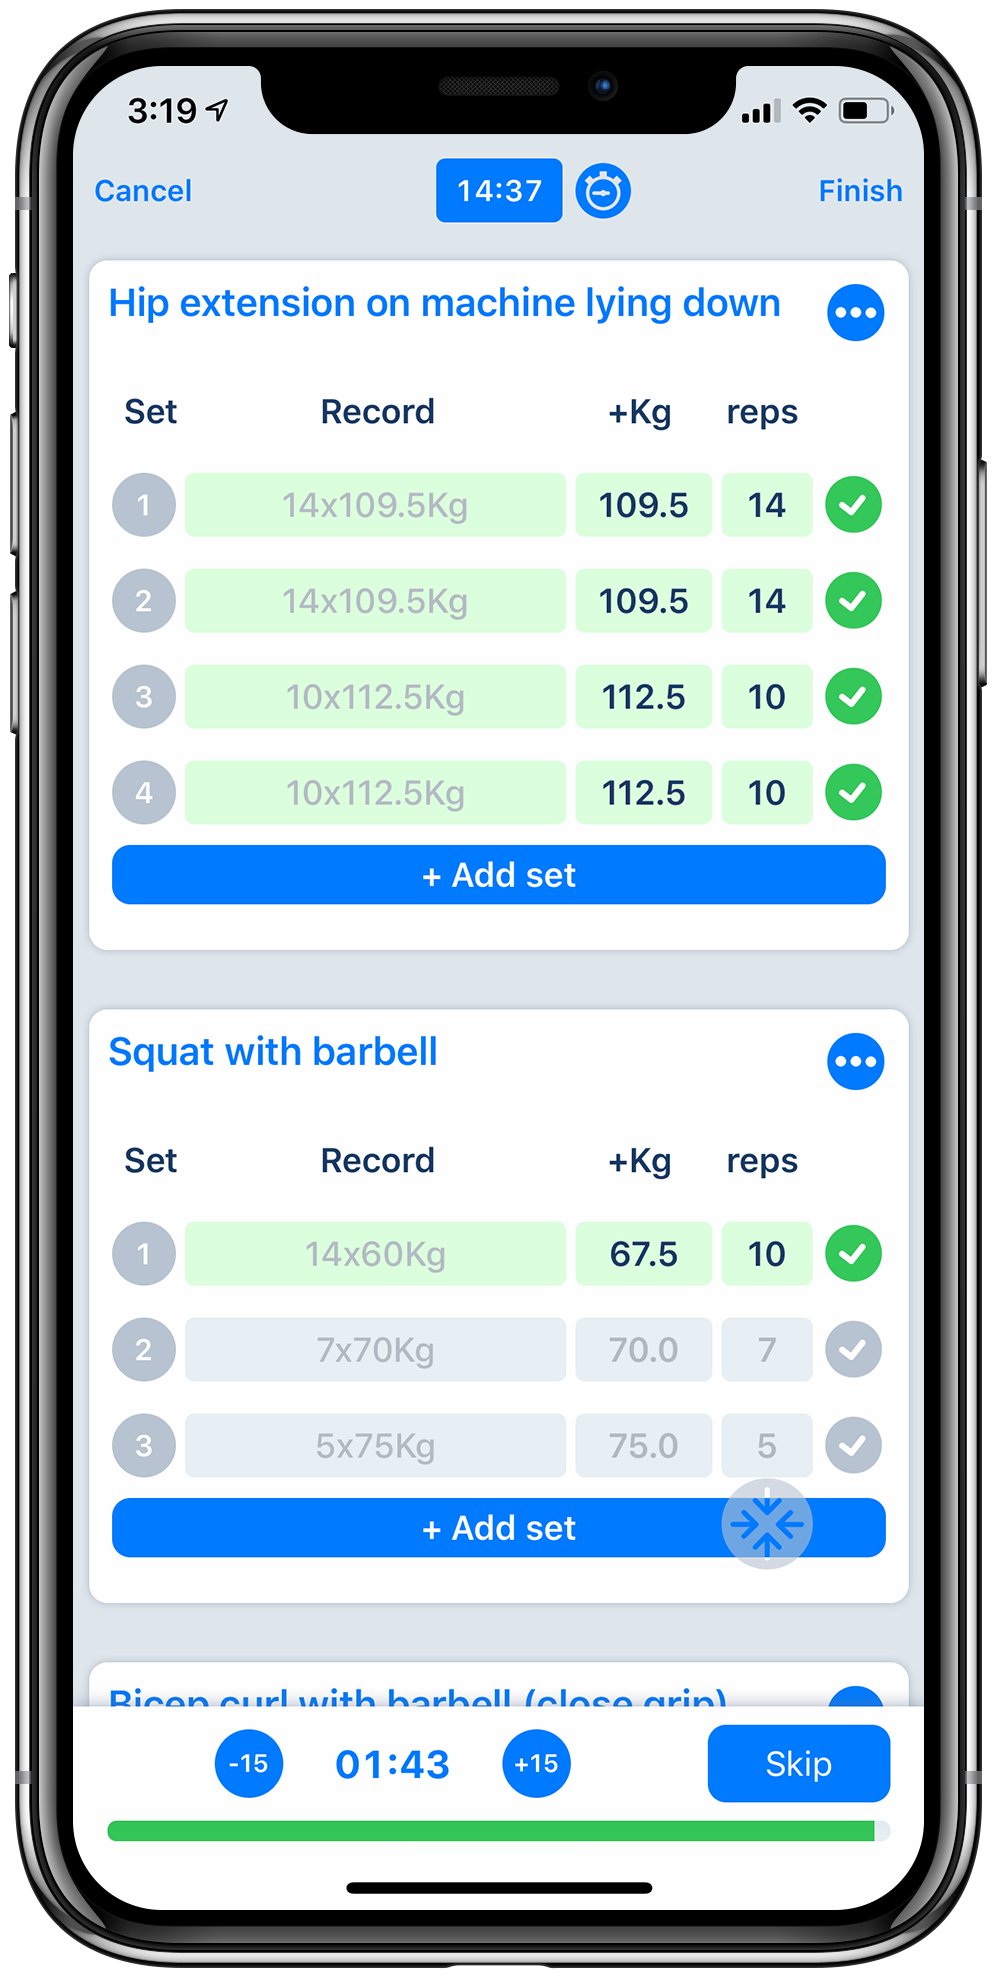 Workout tracker app on iPhone to track weightlifting exercise progress